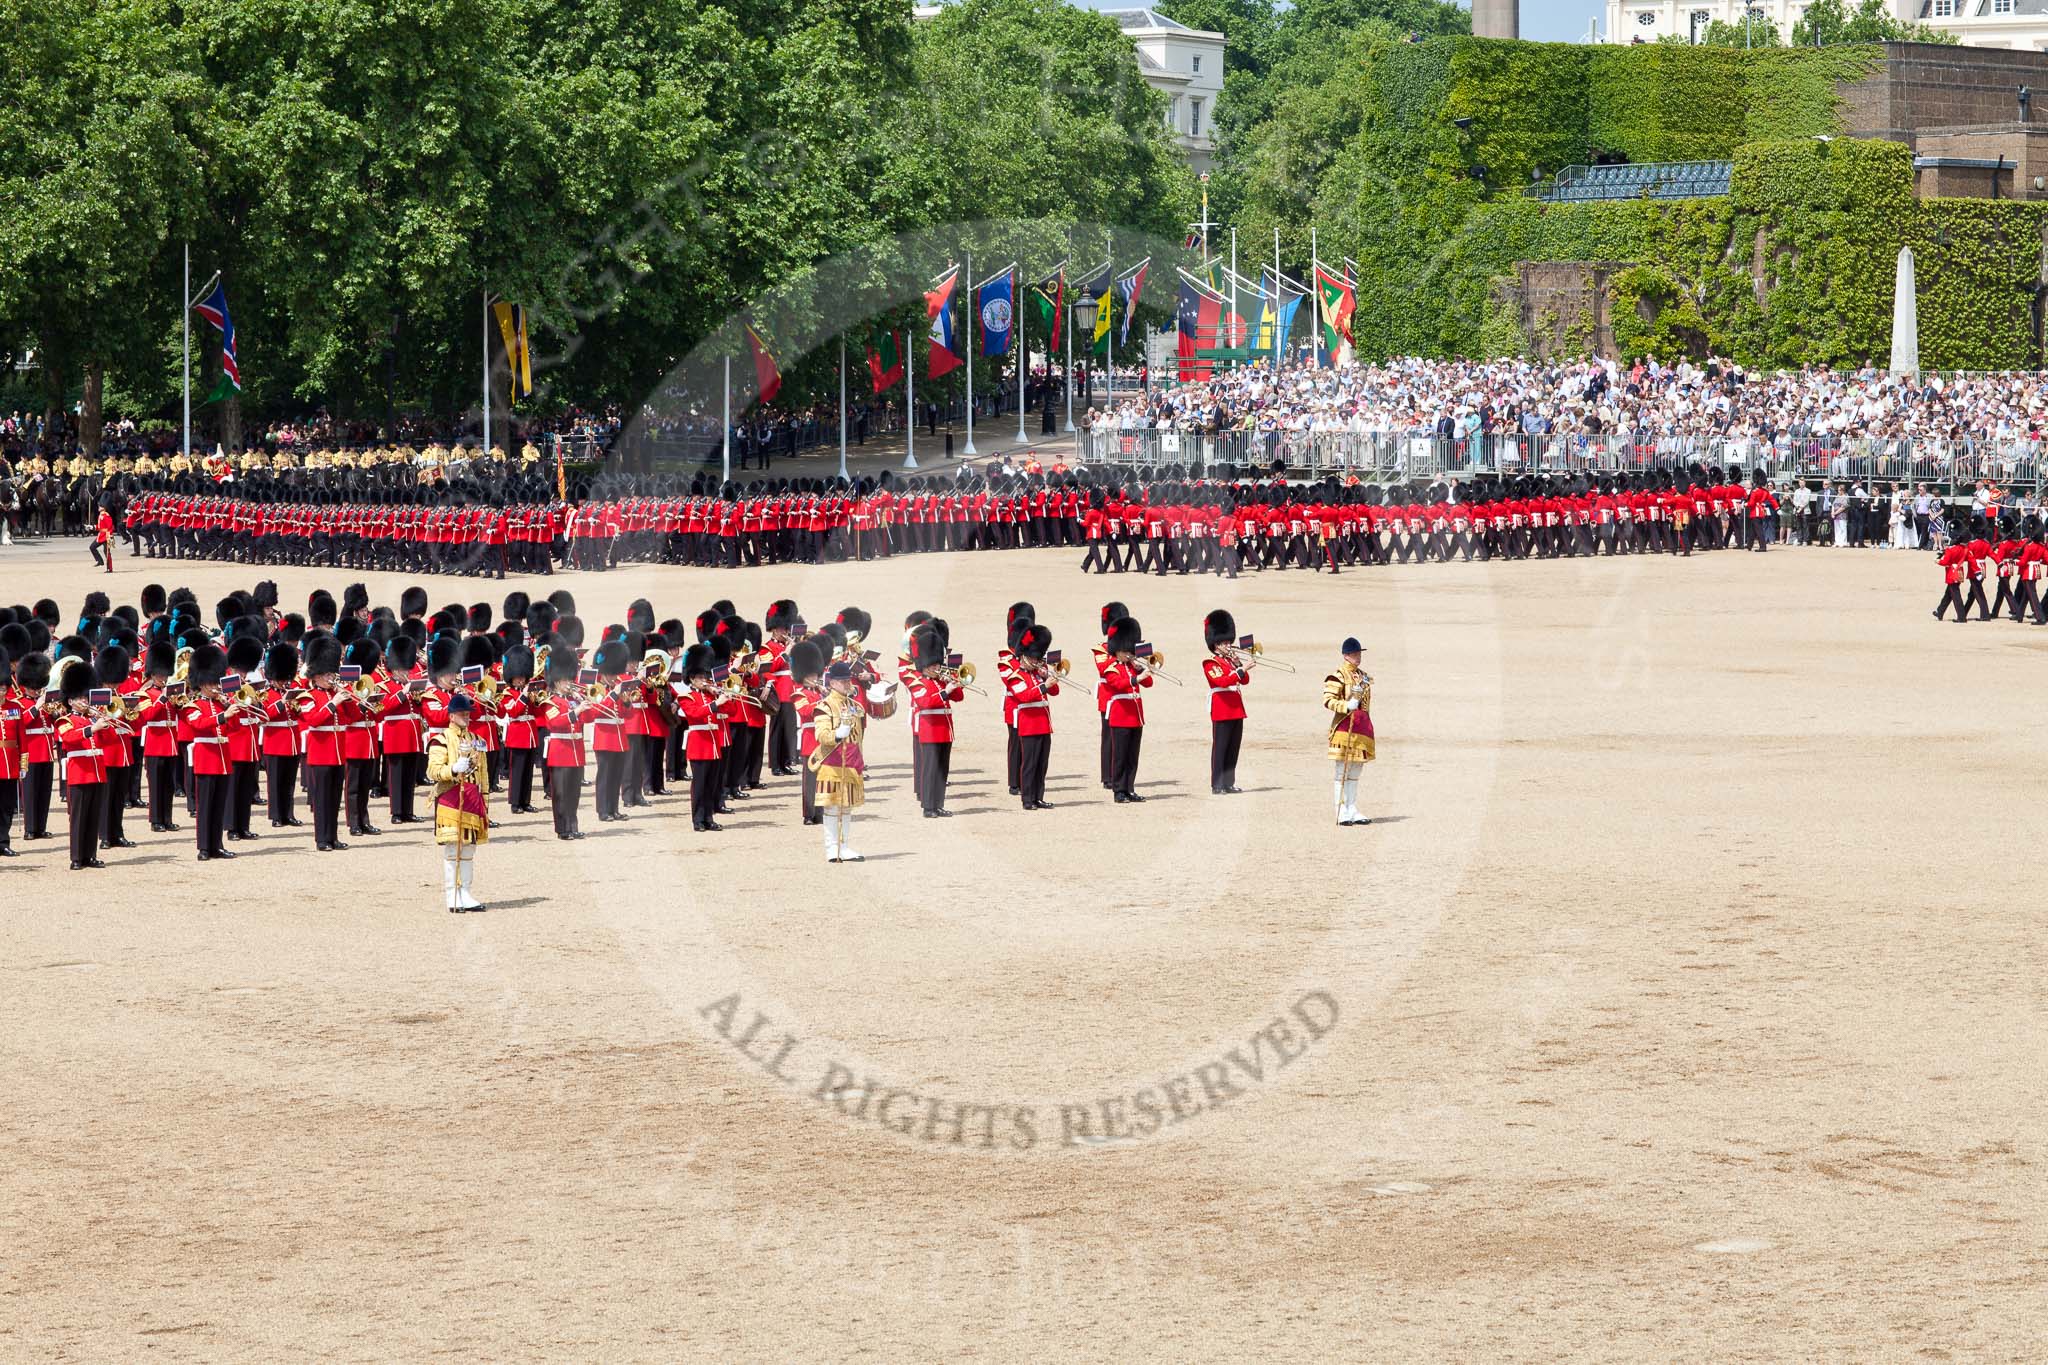 The Colonel's Review 2011: The guards are about to complete the March Past in slow time. On the left, standing in the Centre of Horse Guards Parade, the Massed Bands..
Horse Guards Parade, Westminster,
London SW1,

United Kingdom,
on 04 June 2011 at 11:47, image #219